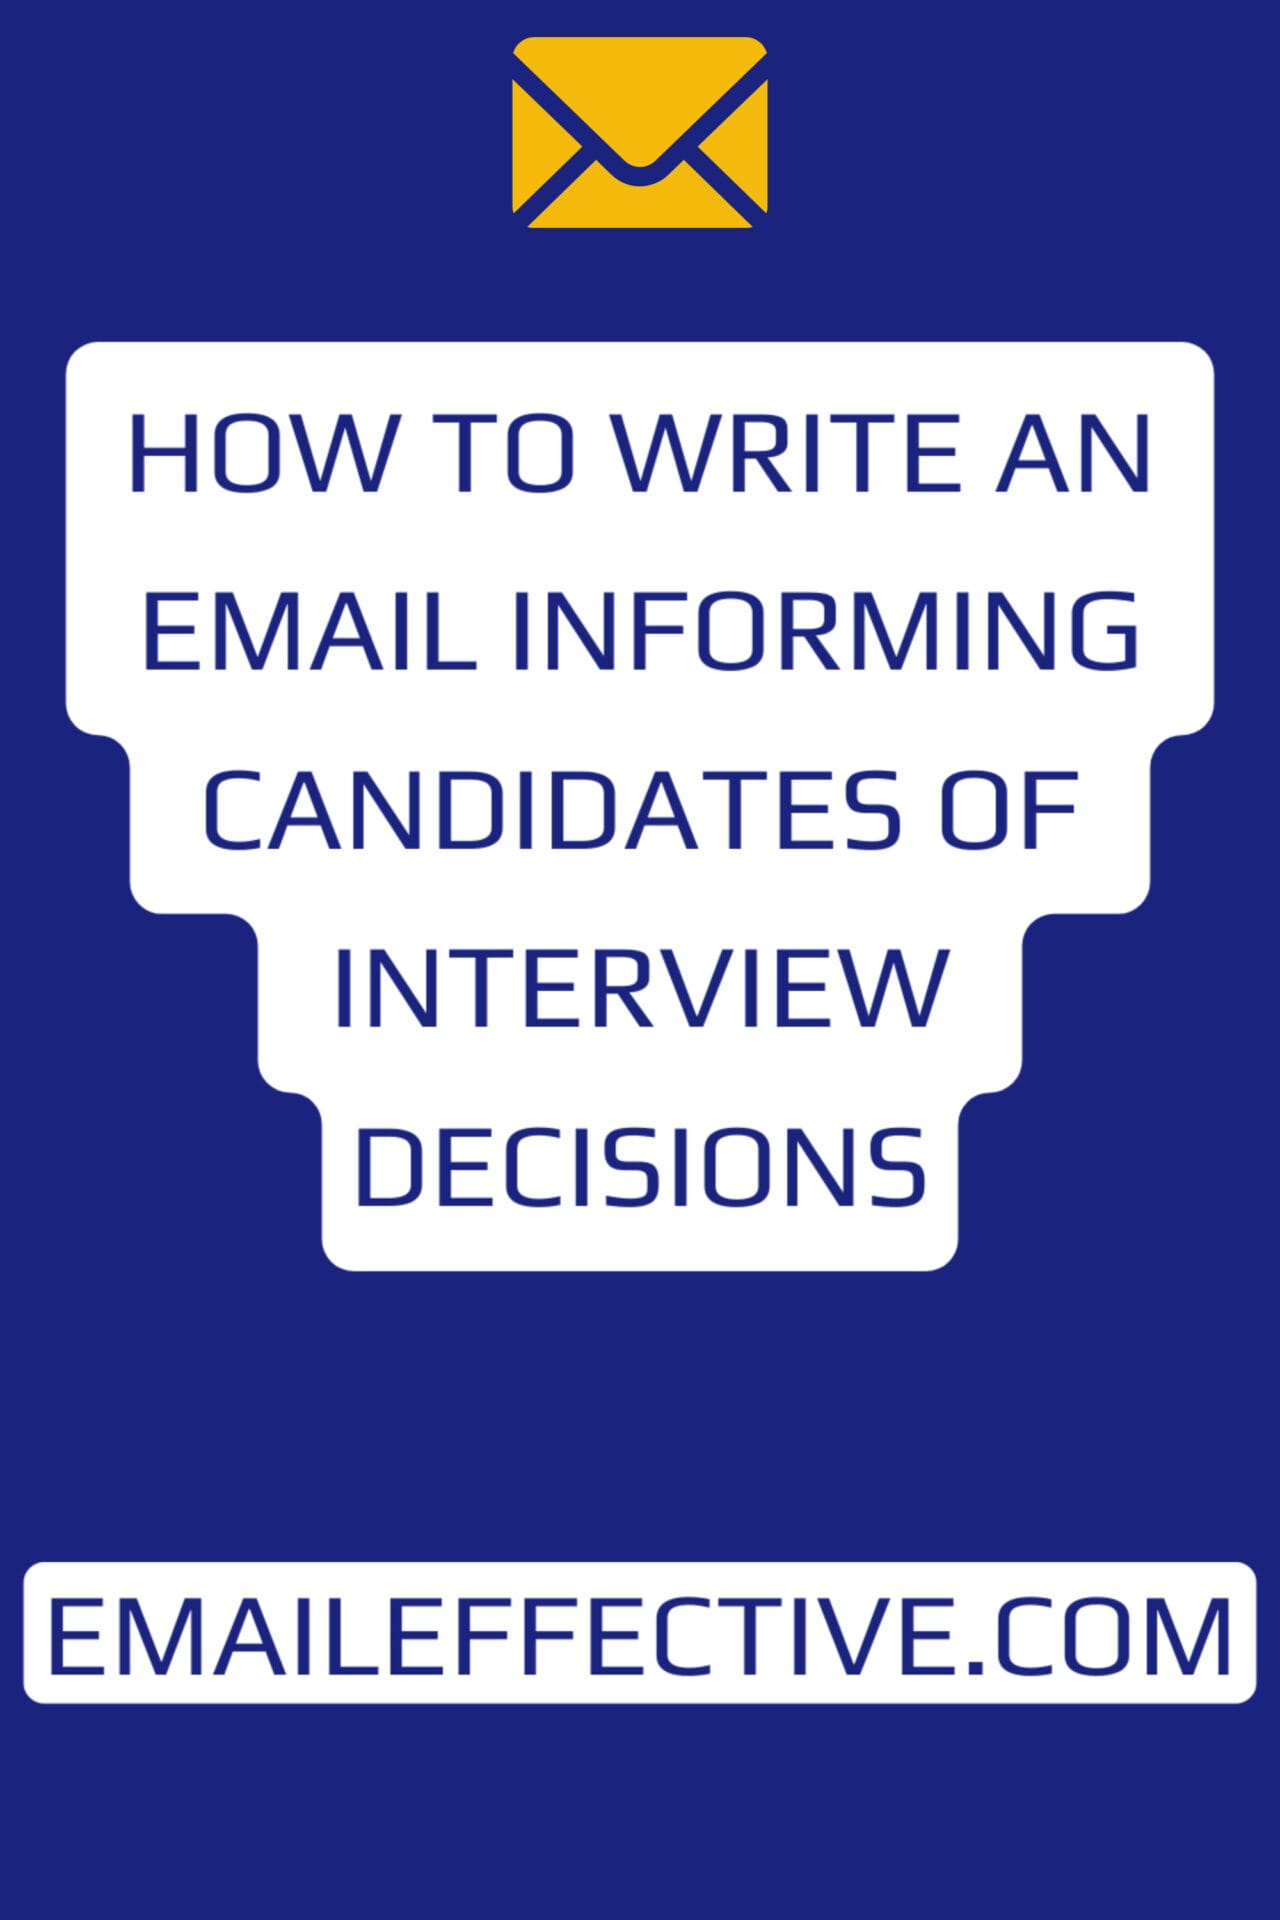 How to Write an Email Informing Candidates of Interview Decisions